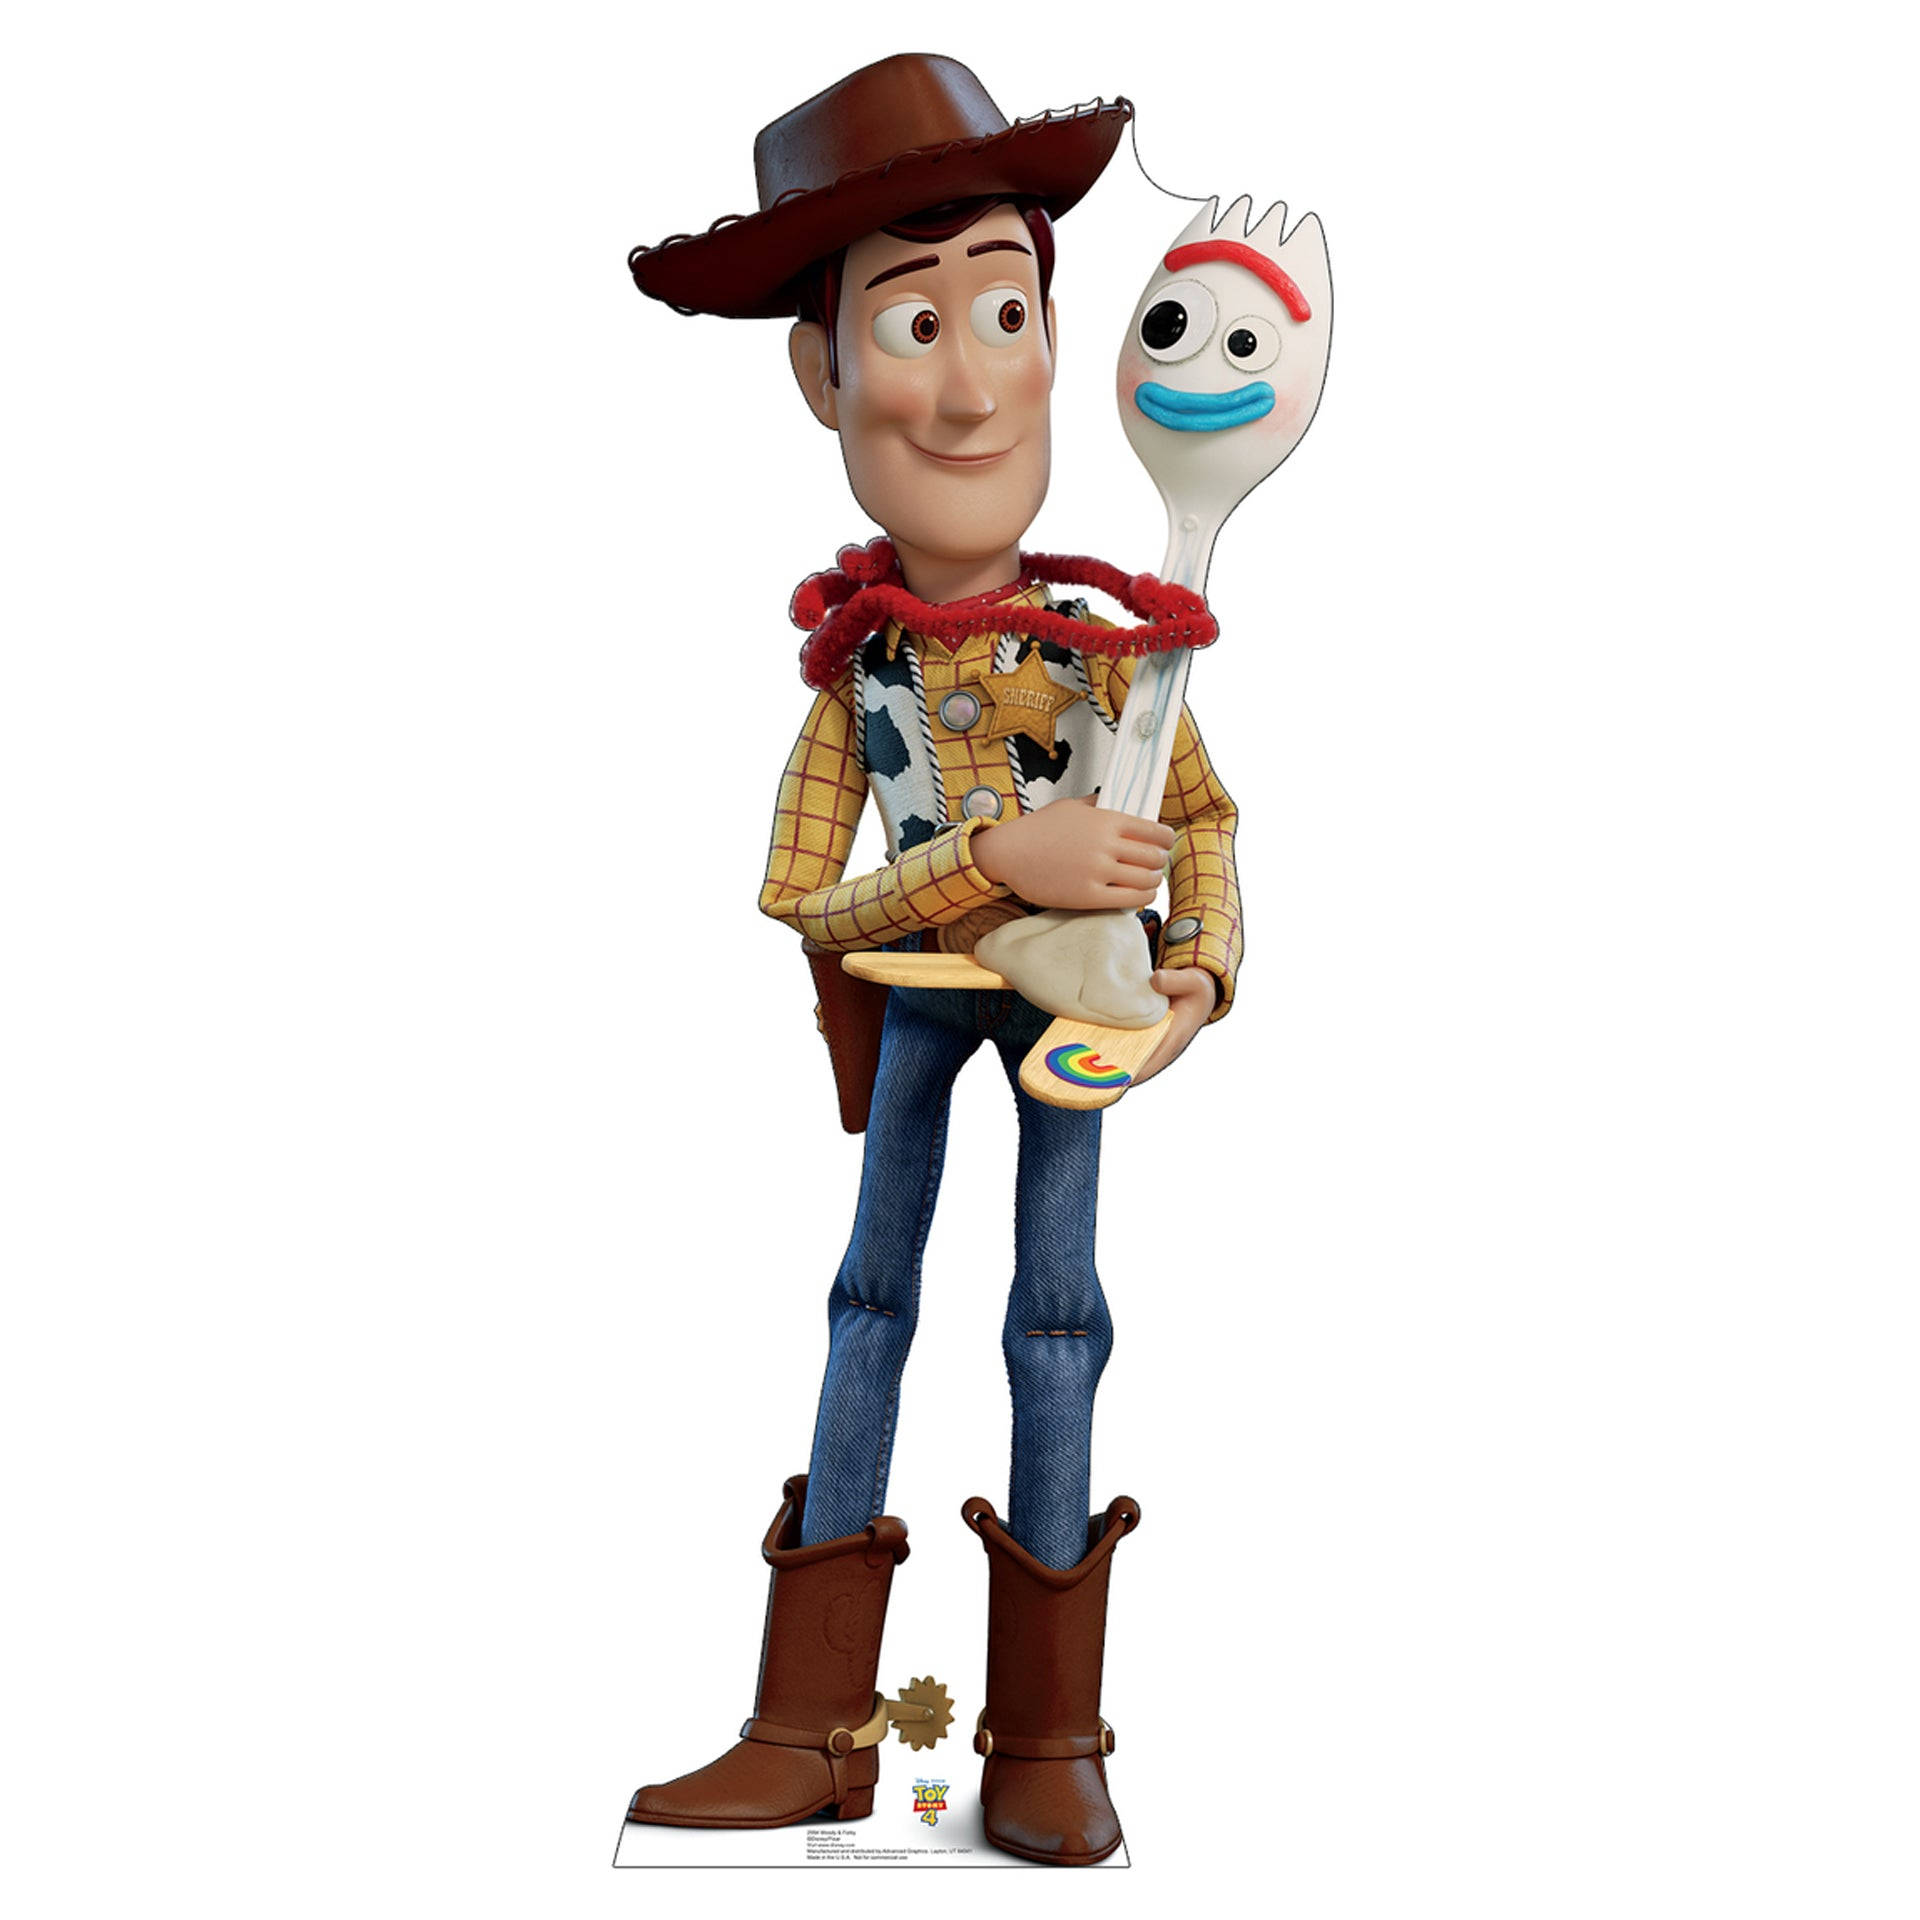 Toy Story Forky And Woody's Friendship Wallpaper